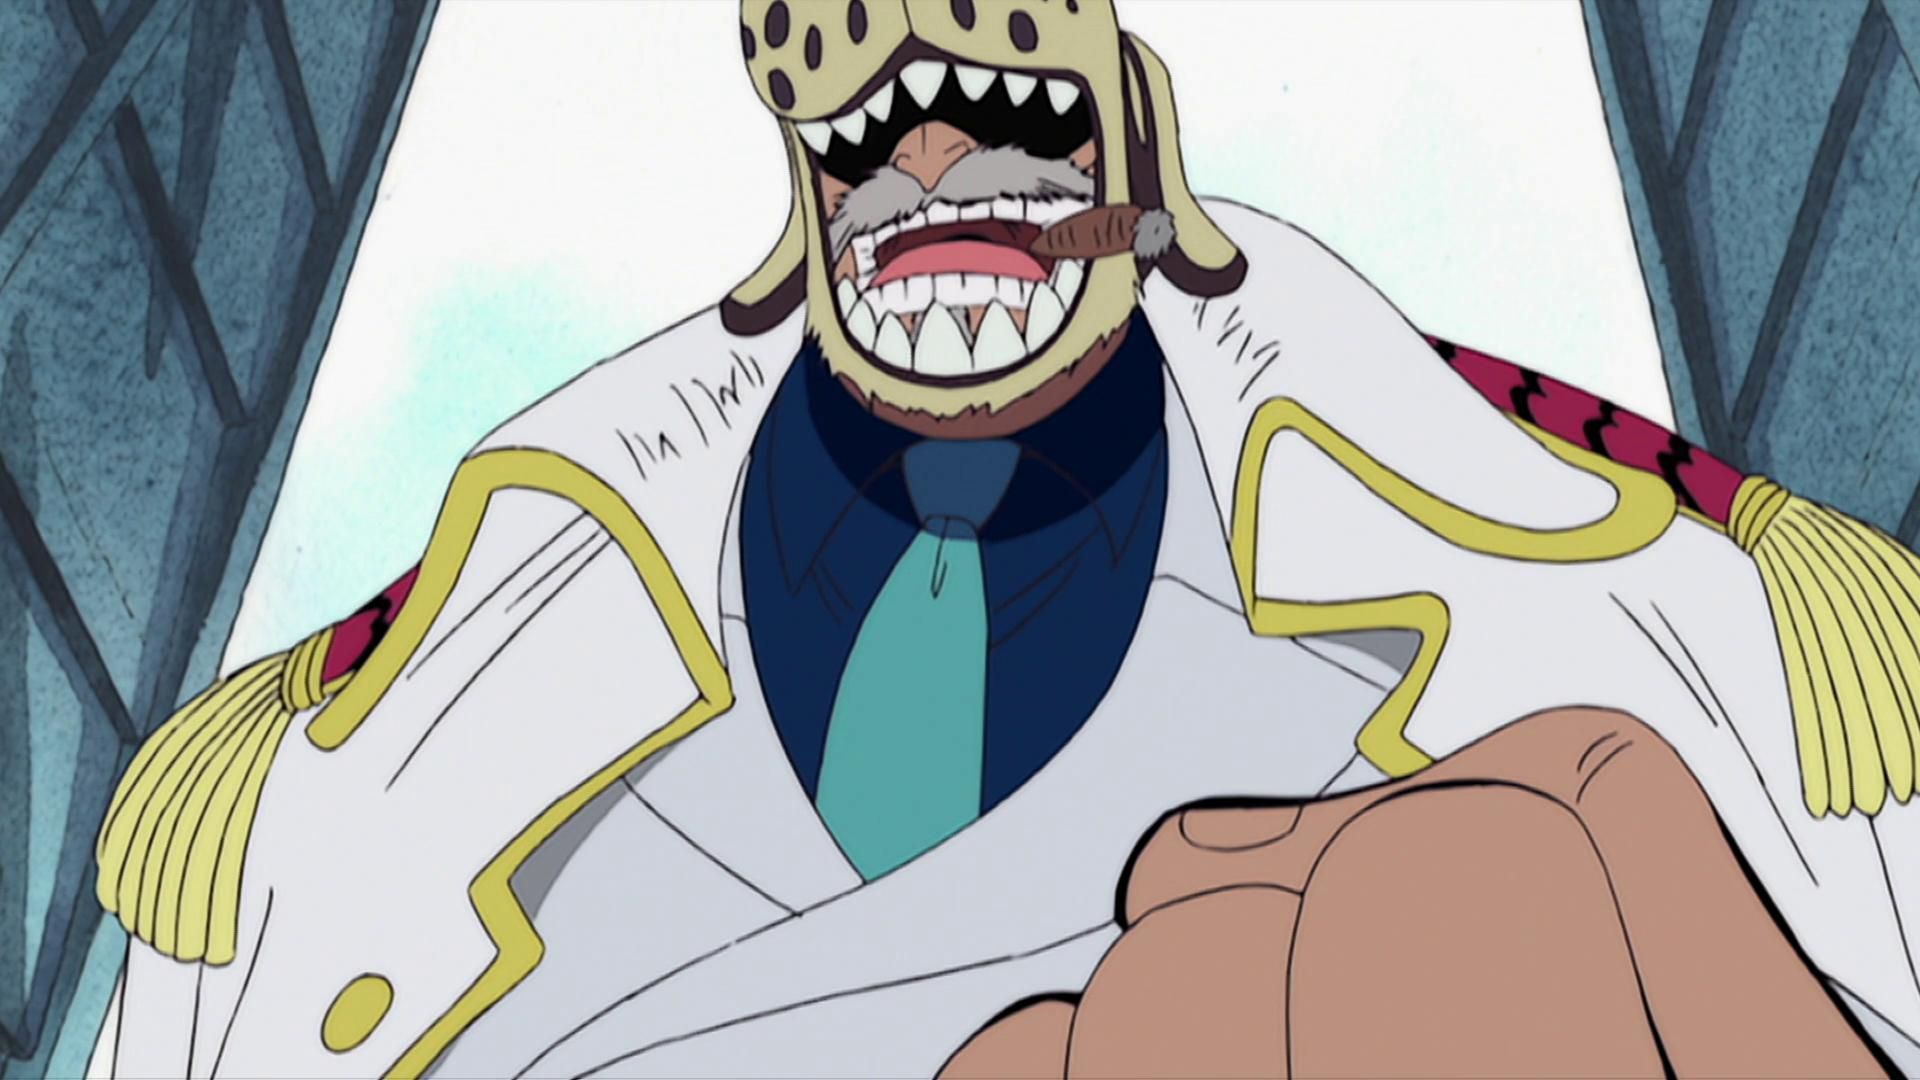 Garp is a true icon of the One Piece series (Image via Toei Animation, One Piece)